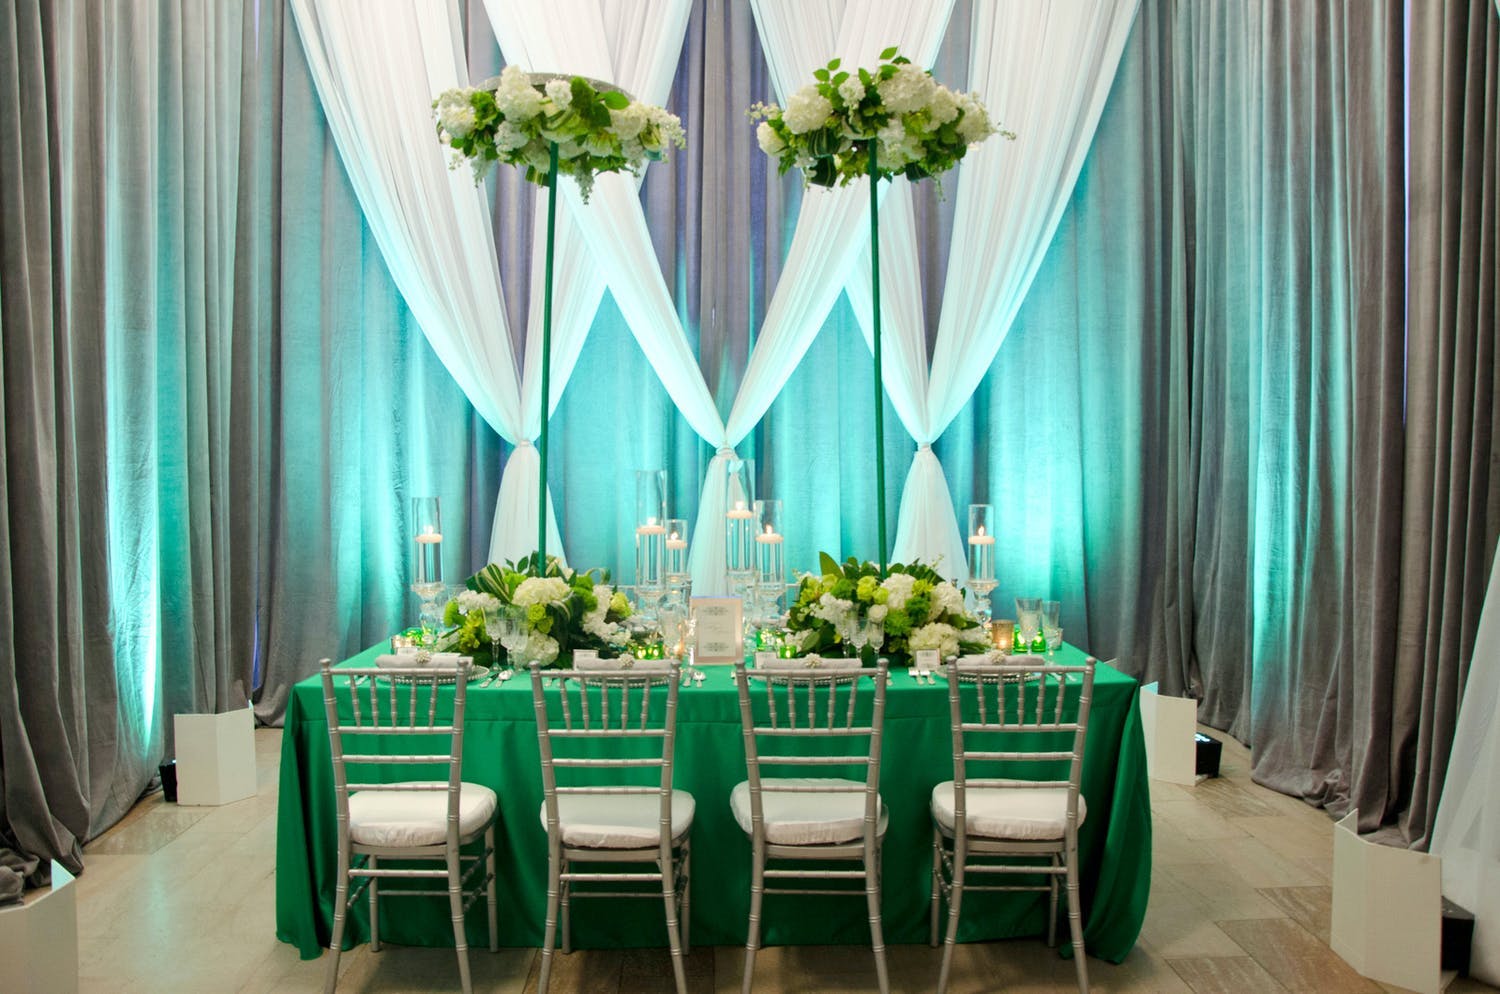 Modern Wedding Tablescape With Green Linen, Elevated Parasol-Like Greenery Centerpieces, and Sheer White, Green, and Gray Wall Draping | PartySlate